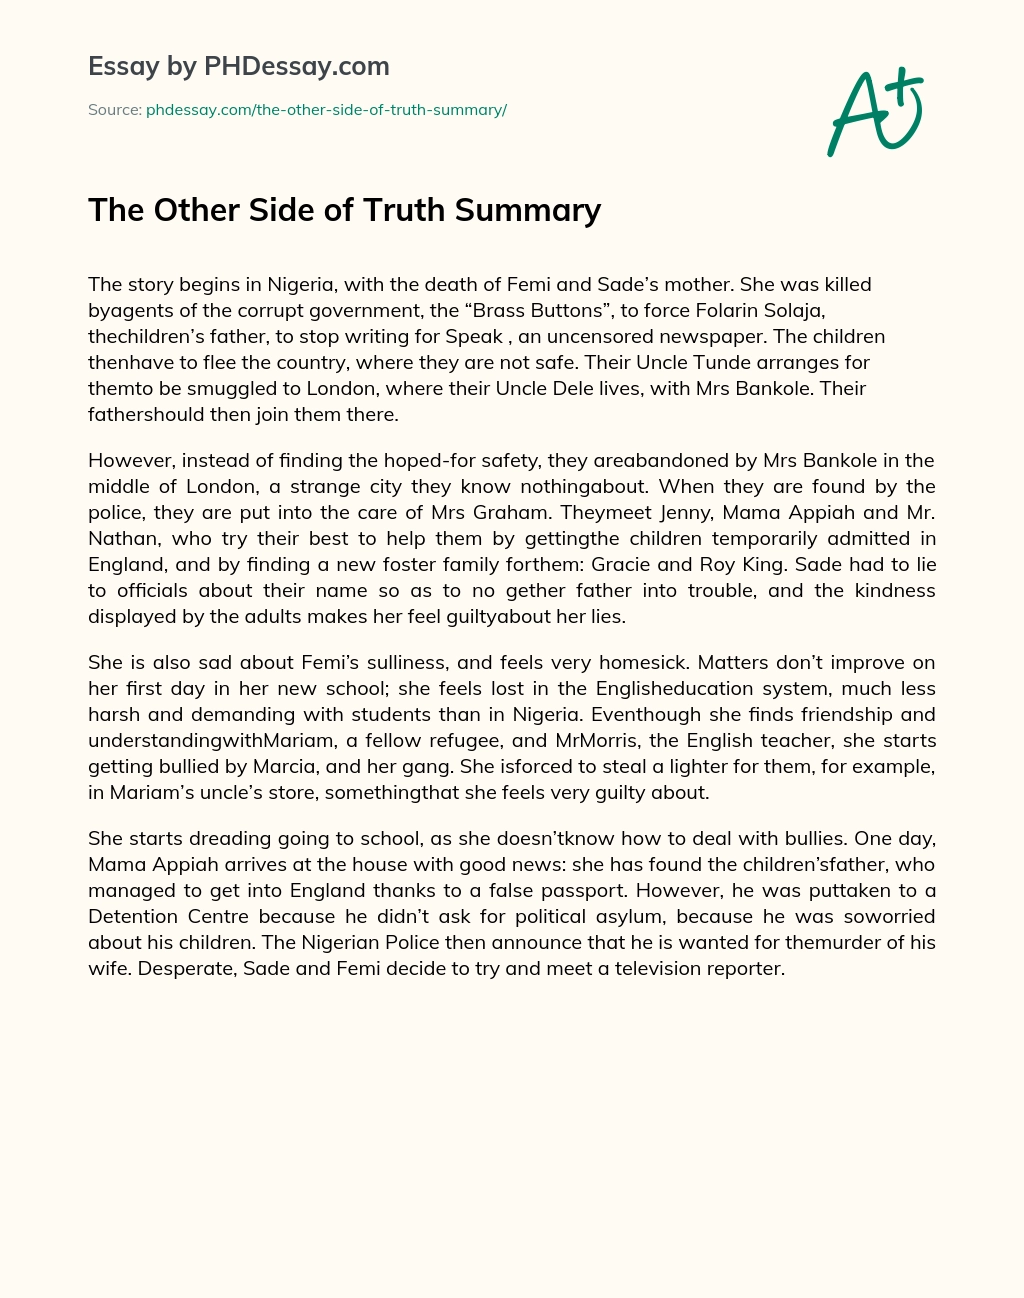 The Other Side of Truth Summary essay